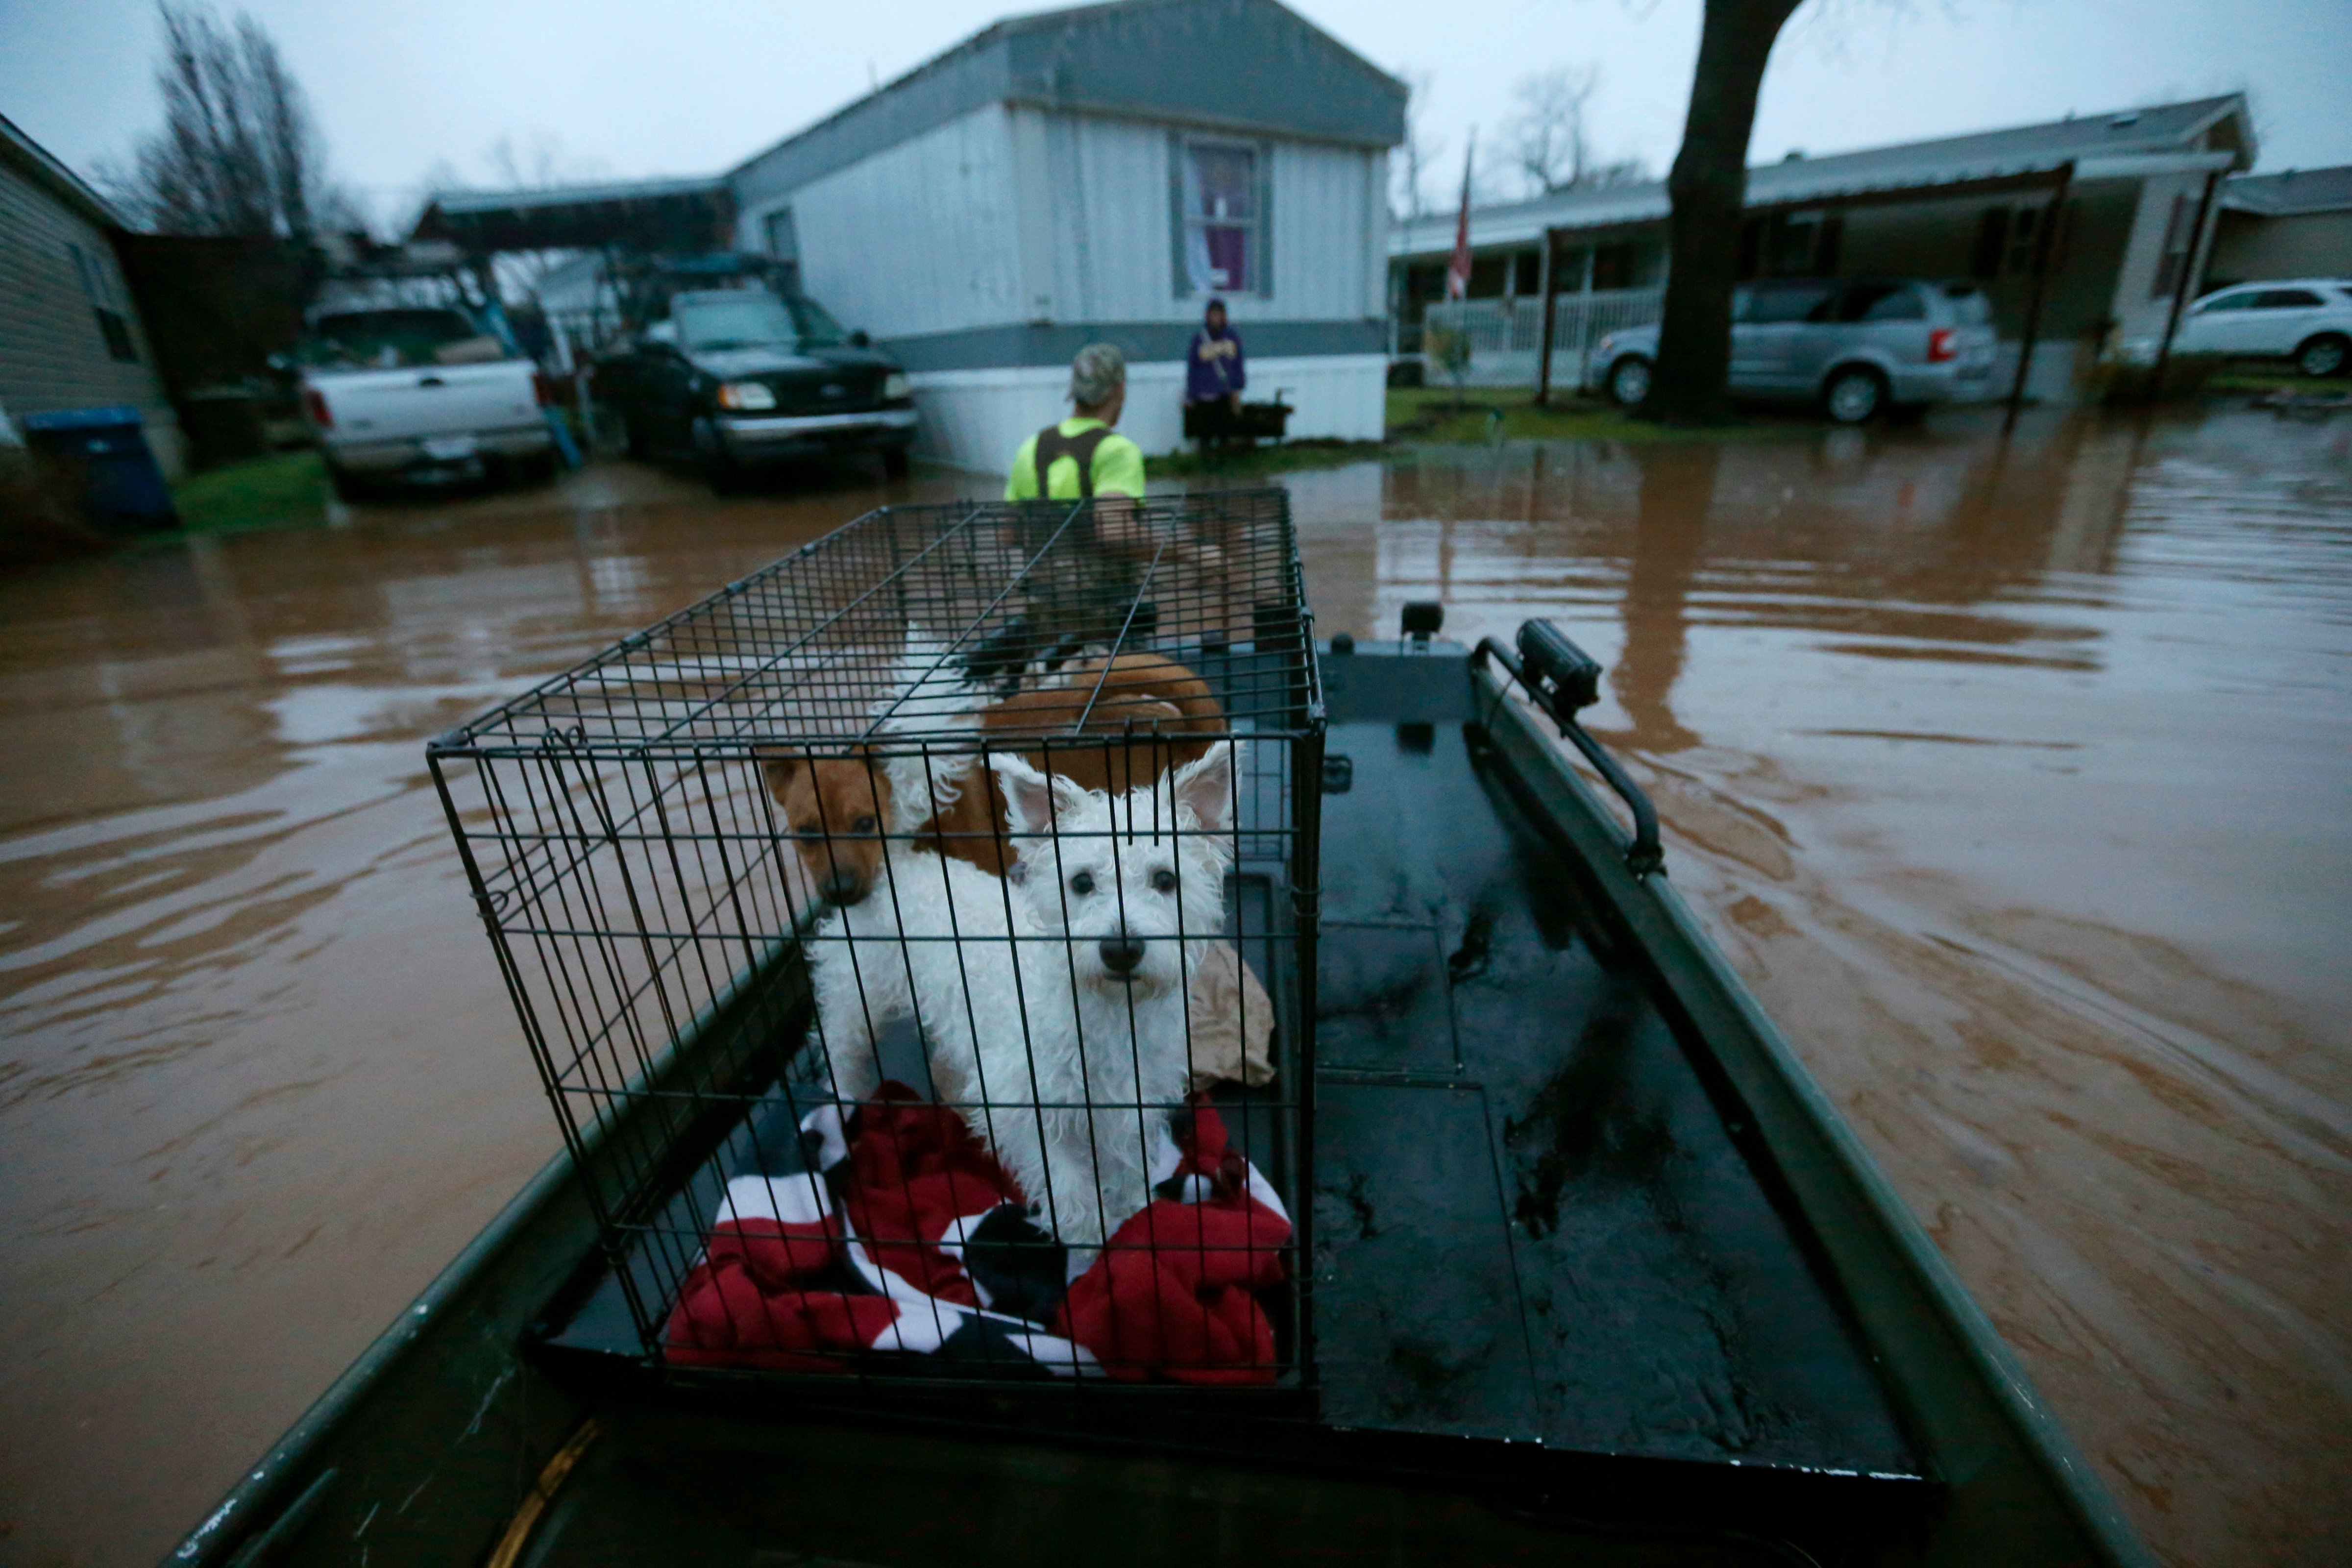 Sam Breen helps his friend retrieve his dogs Edison and Allie from his home, as floodwater rises at the Pecan Valley Estates trailer park in Bossier City, La., March 9, 2016 (Gerald Herbert—AP)